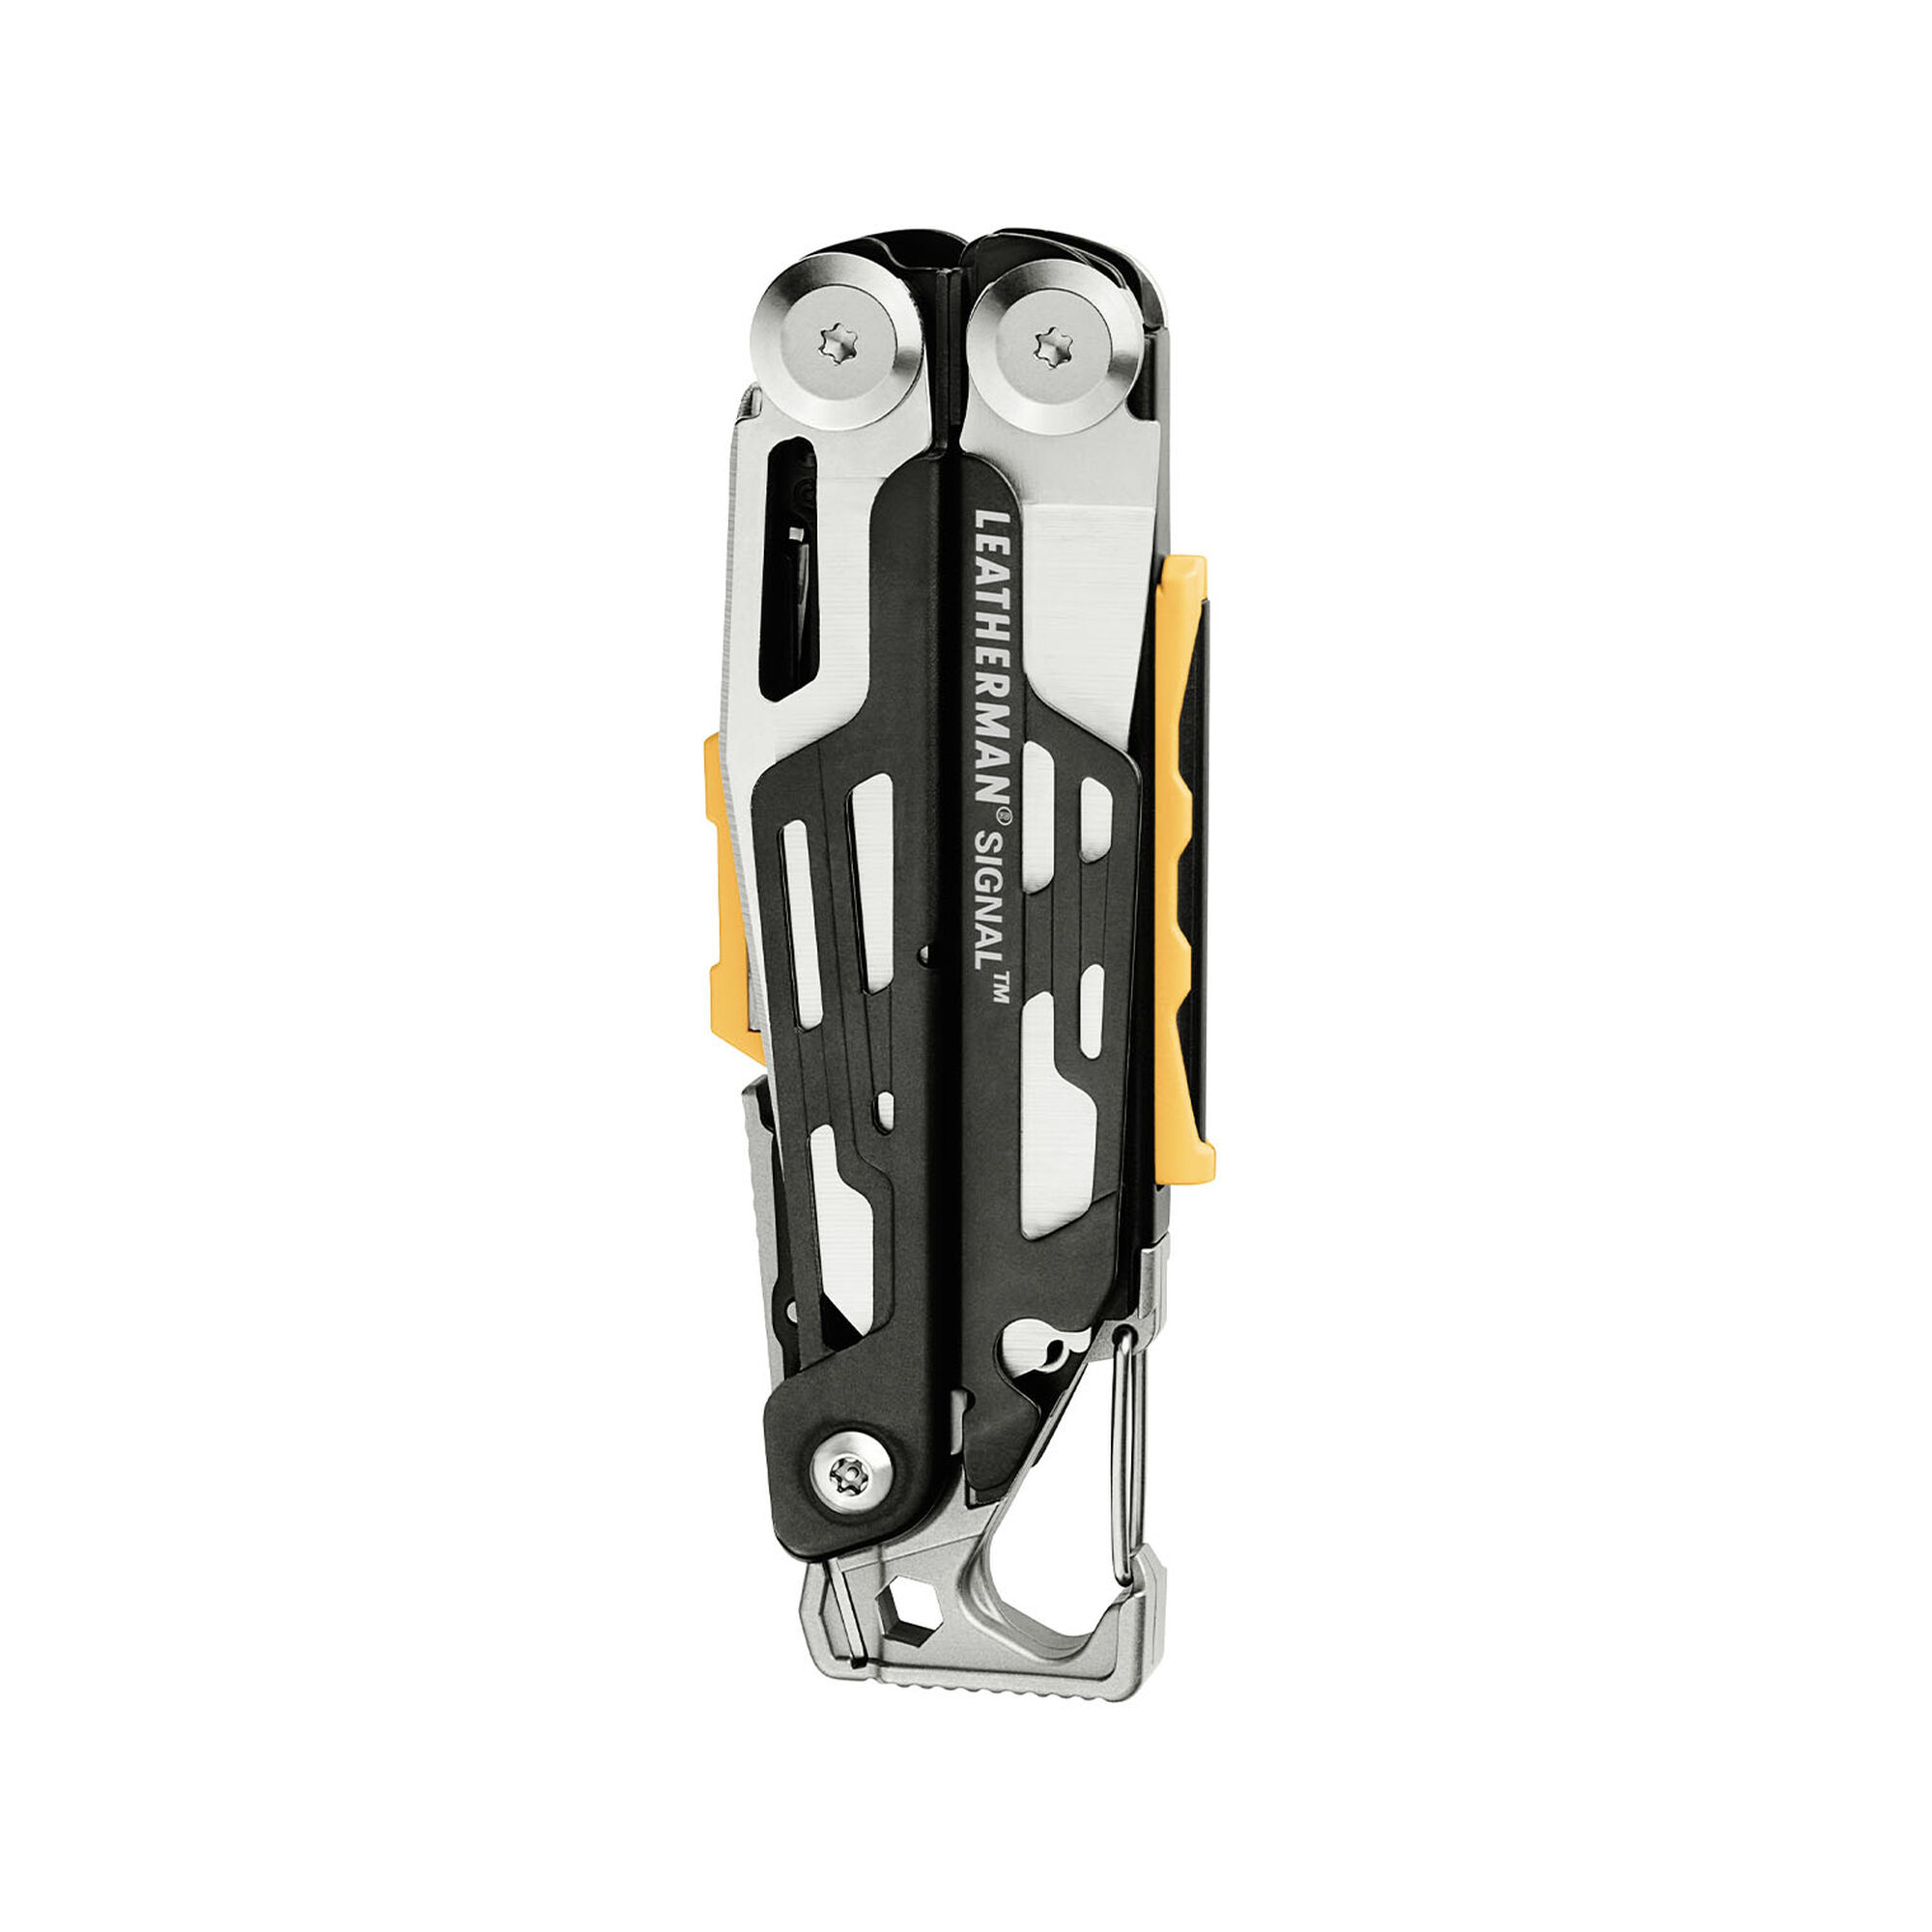 LEATHERMAN, Signal, 19-in-1 Multi-tool for Outdoors, Camping, Hiking,  Fishing, Survival, Durable & Lightweight EDC, Made in the USA,  Topographical